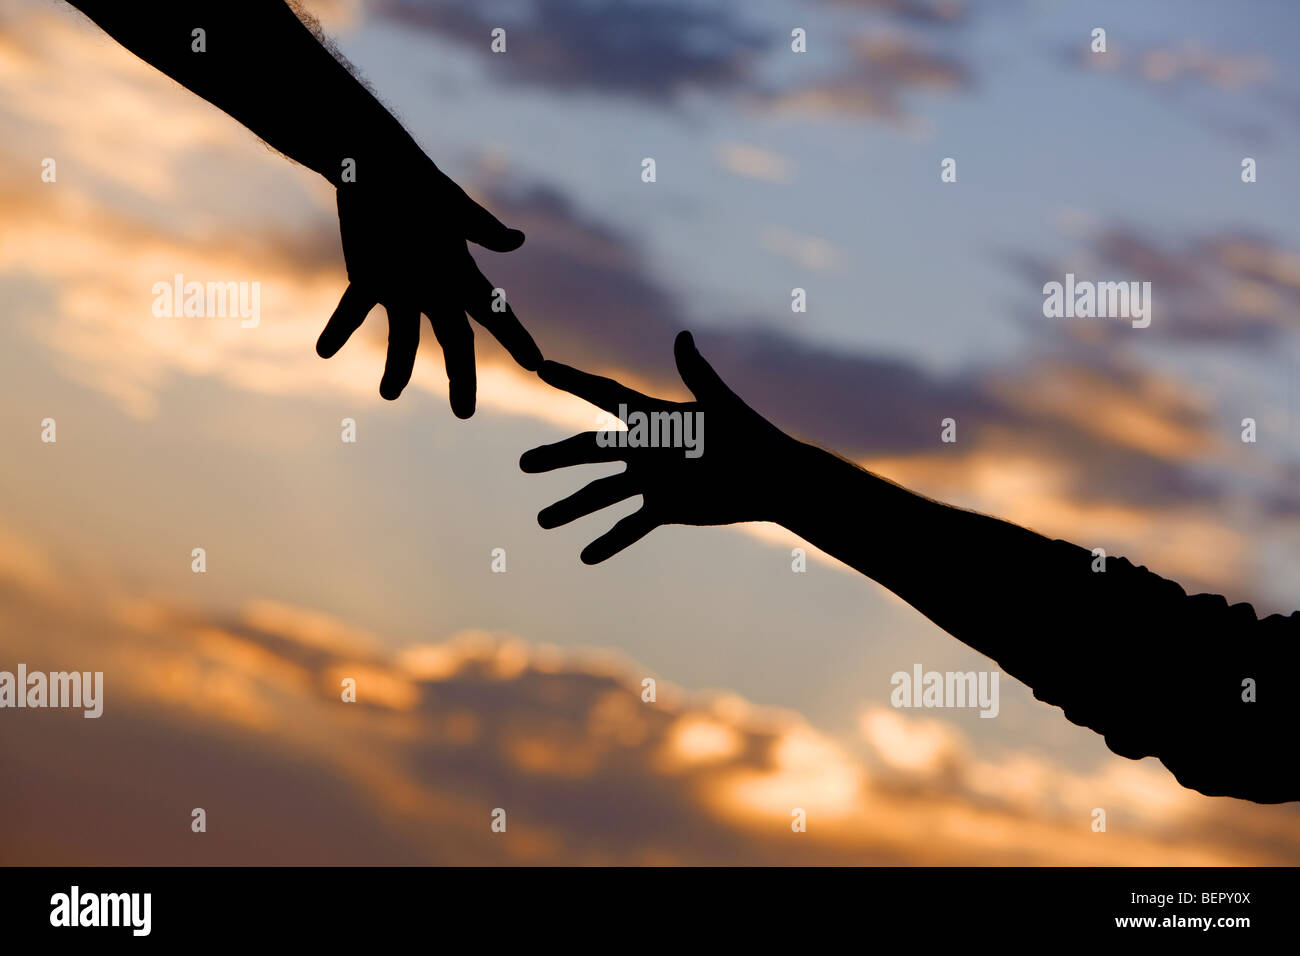 Hand reaching out or pulling away. Stock Photo